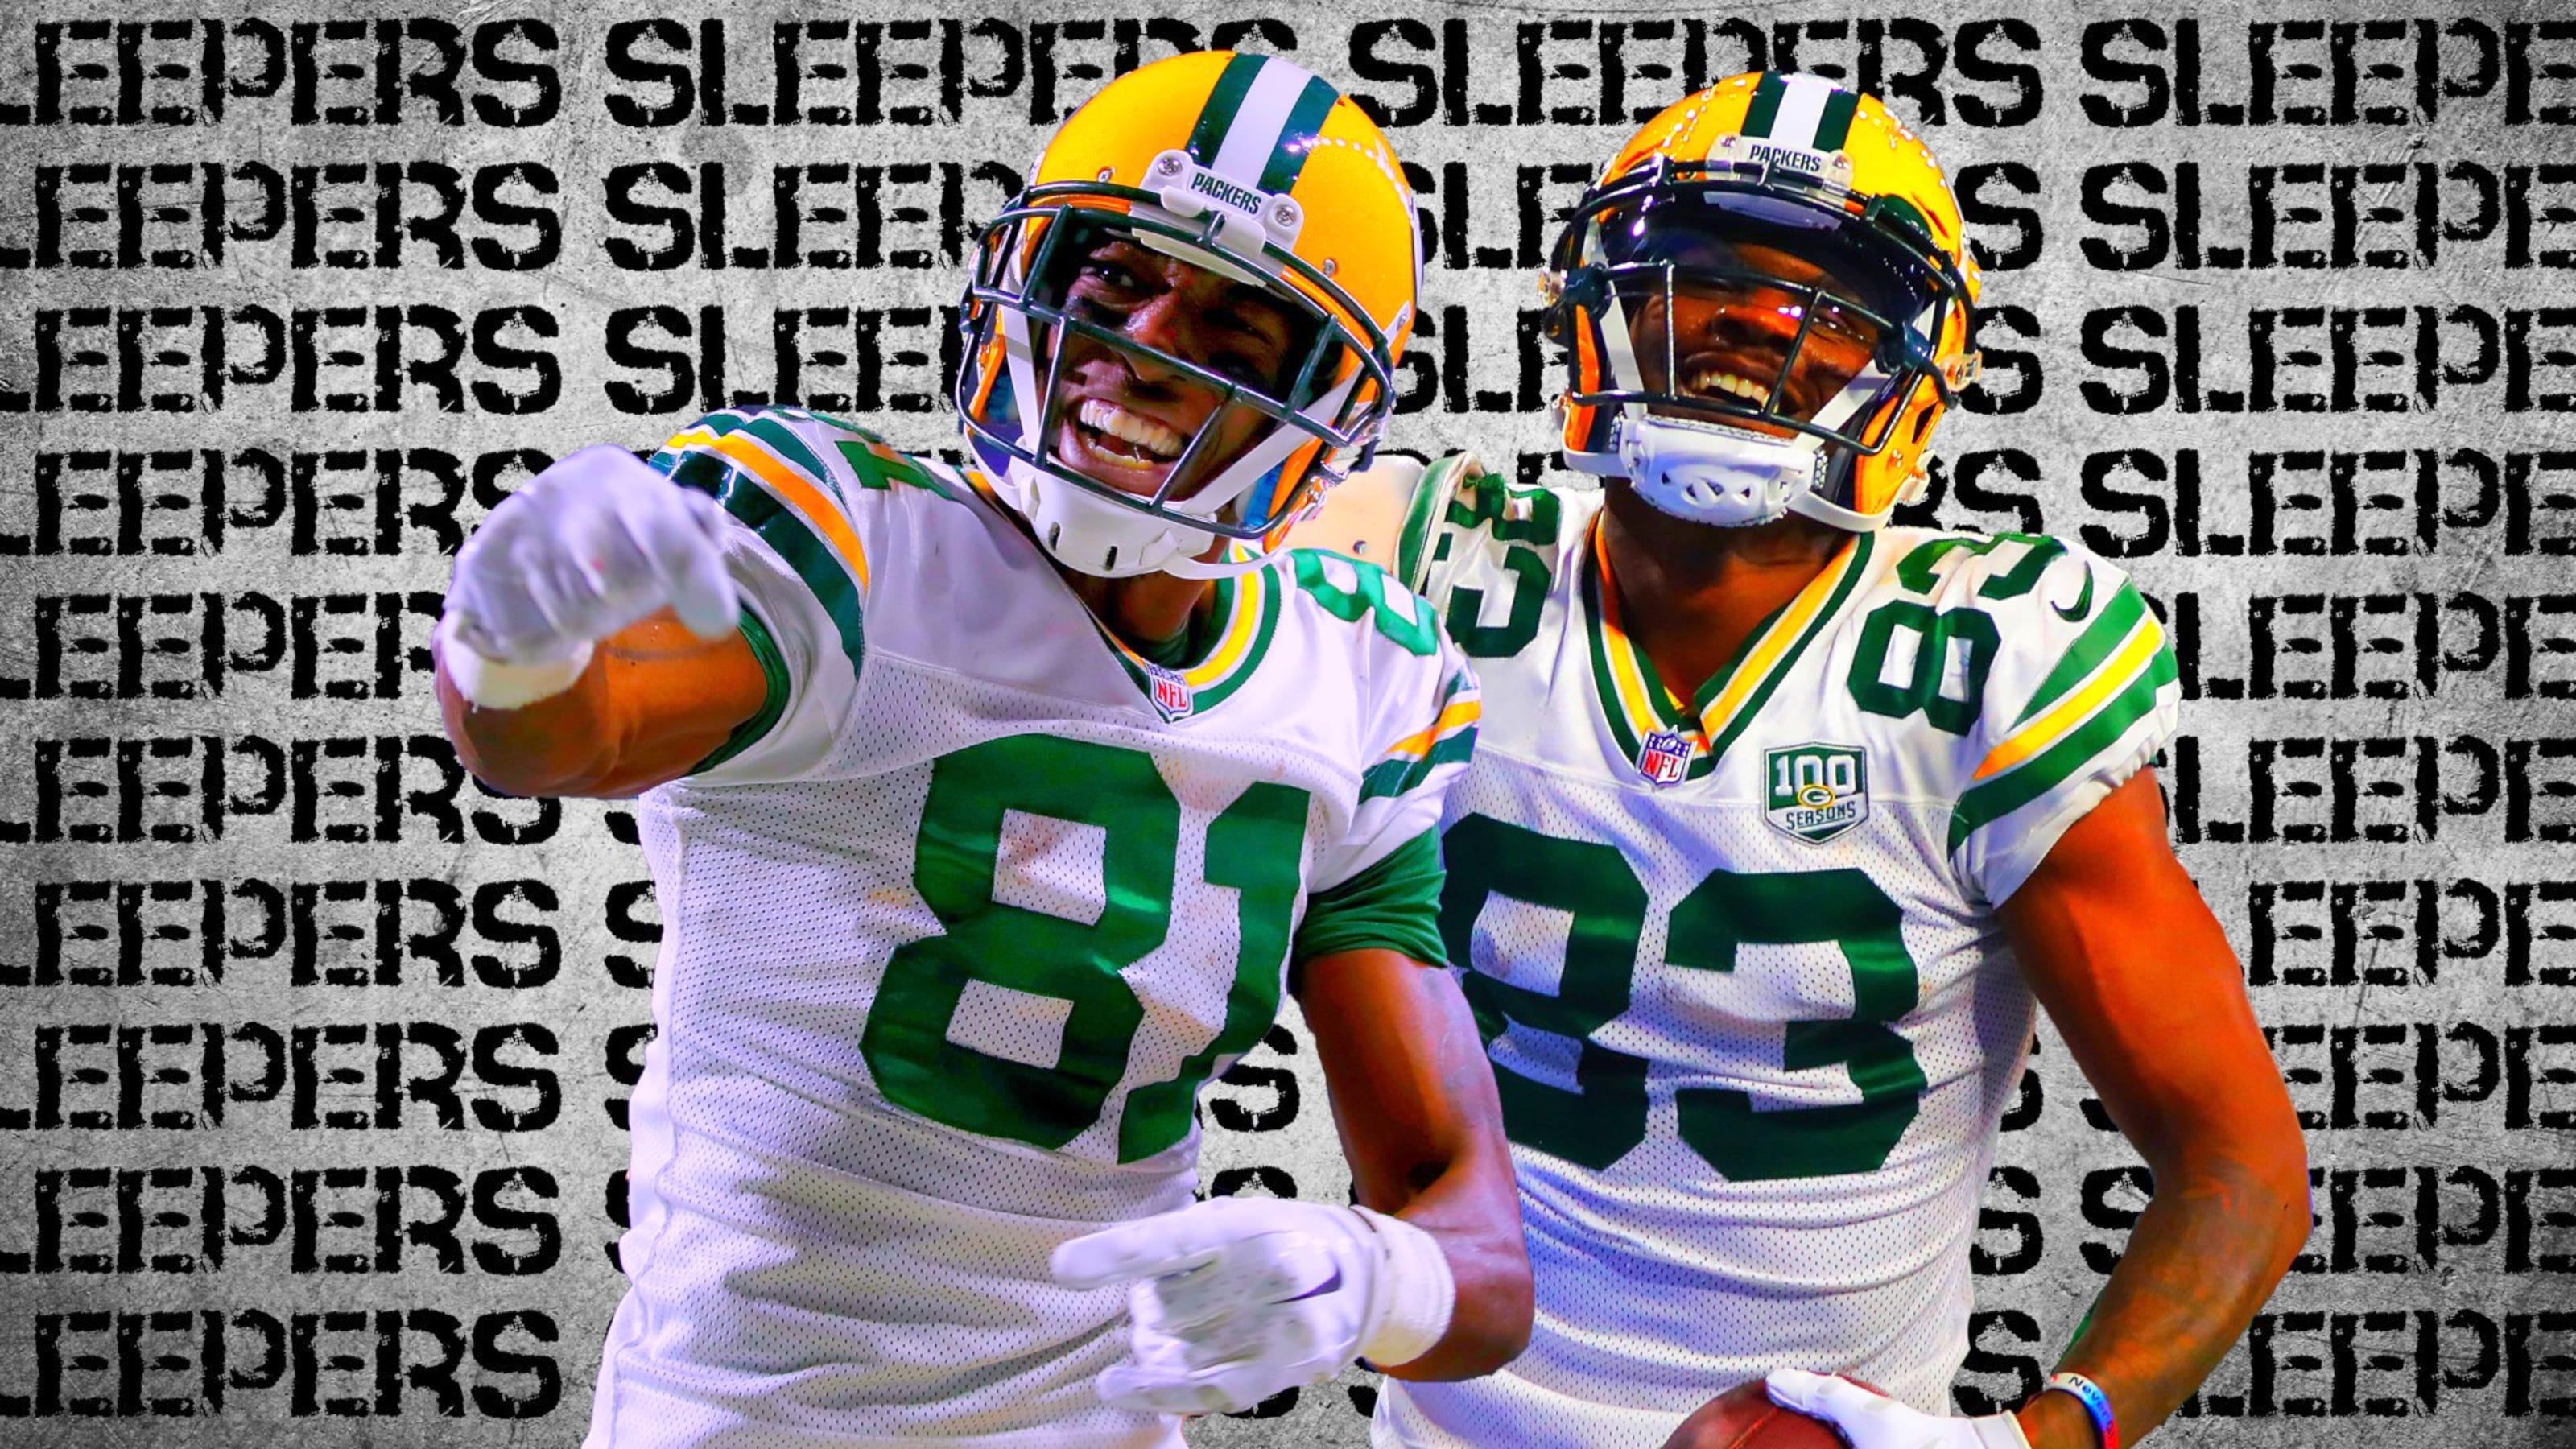 Four fantasy football sleepers you need to own